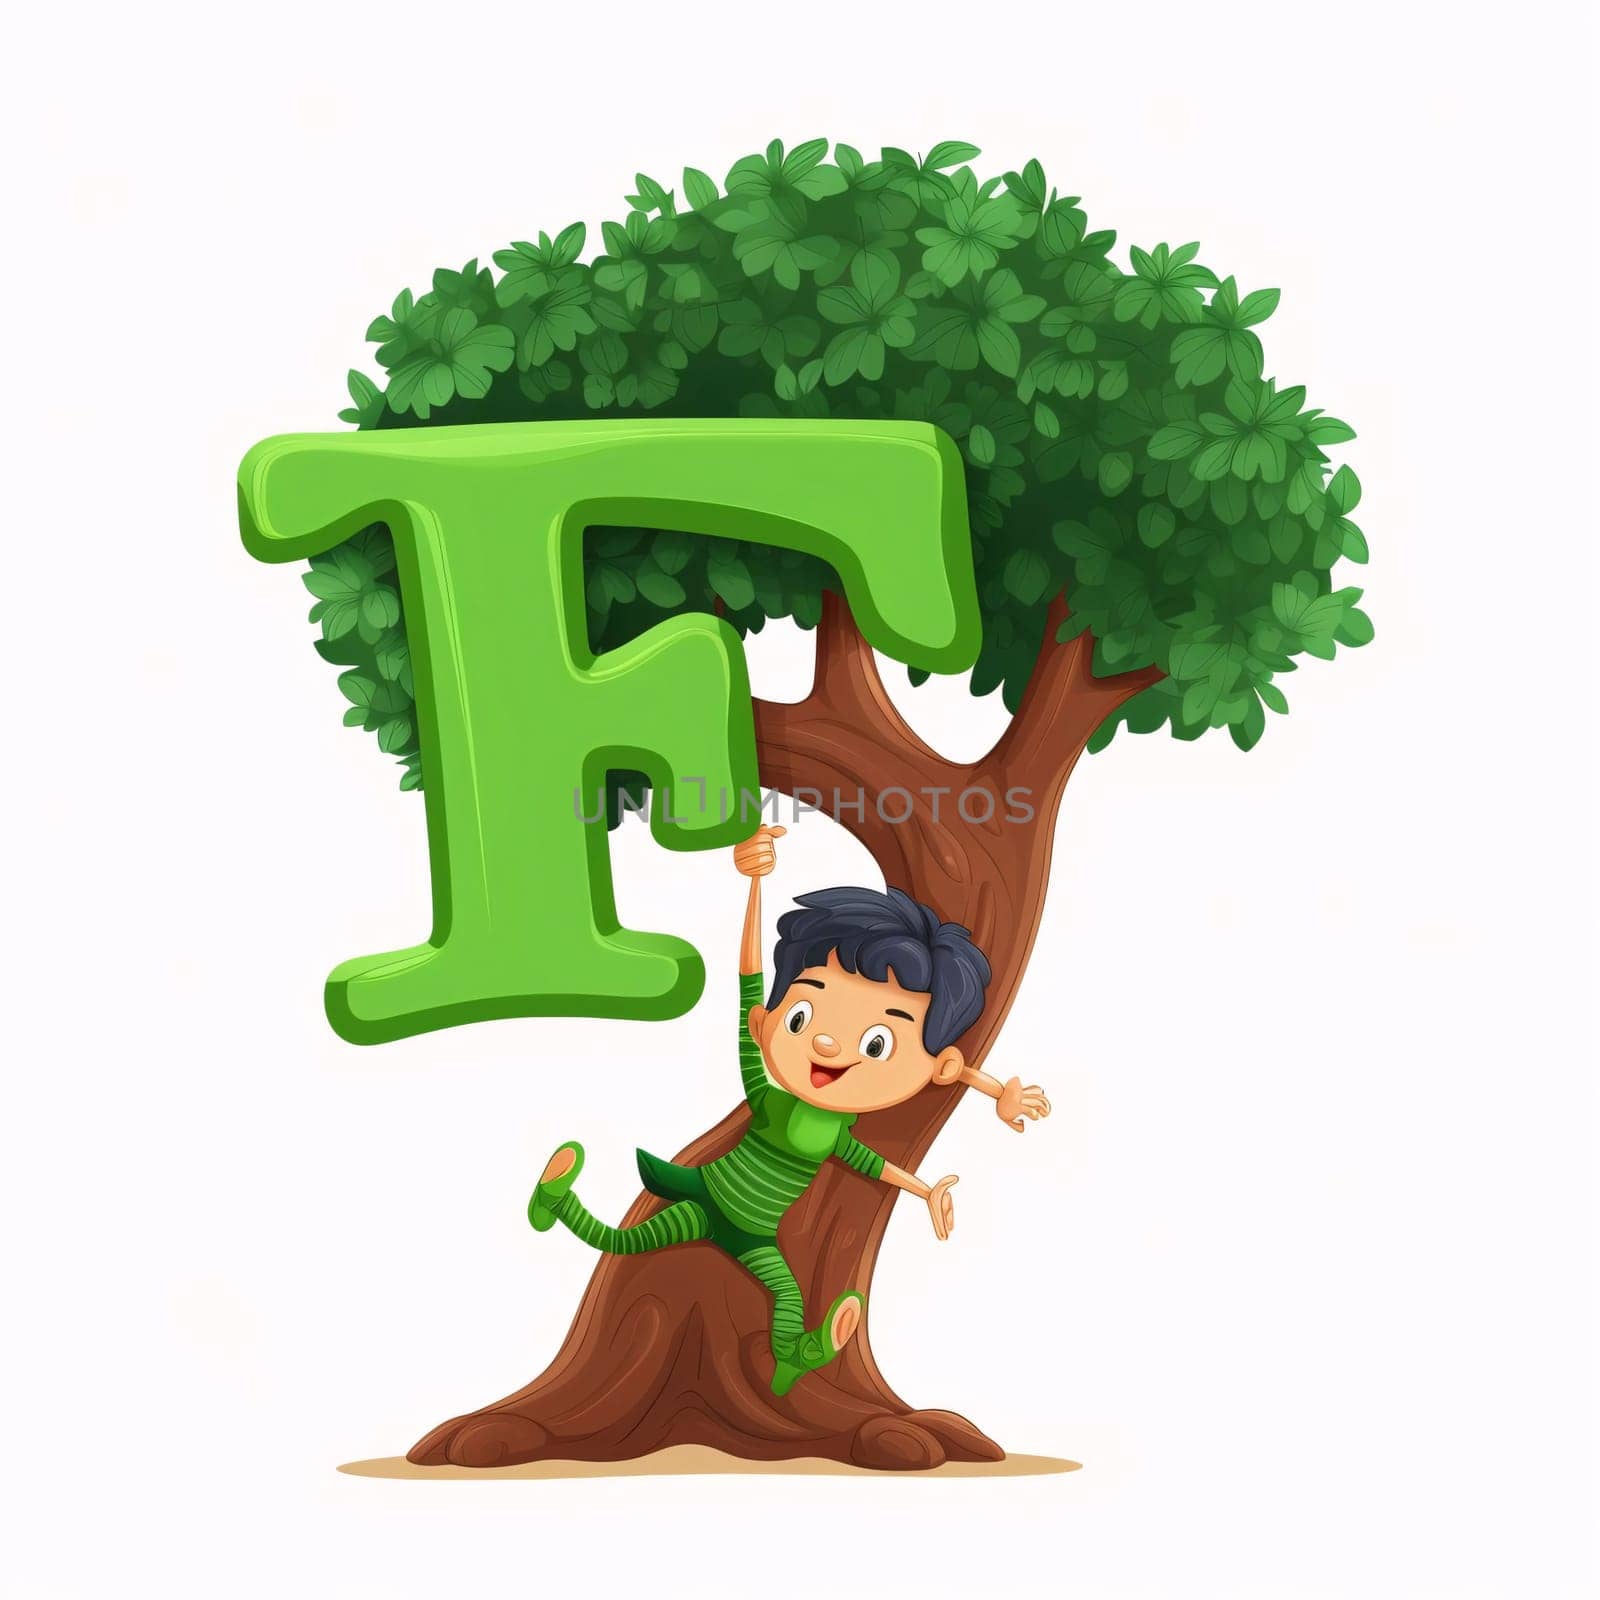 Graphic alphabet letters: Vector illustration of a boy holding the letter F under a tree.